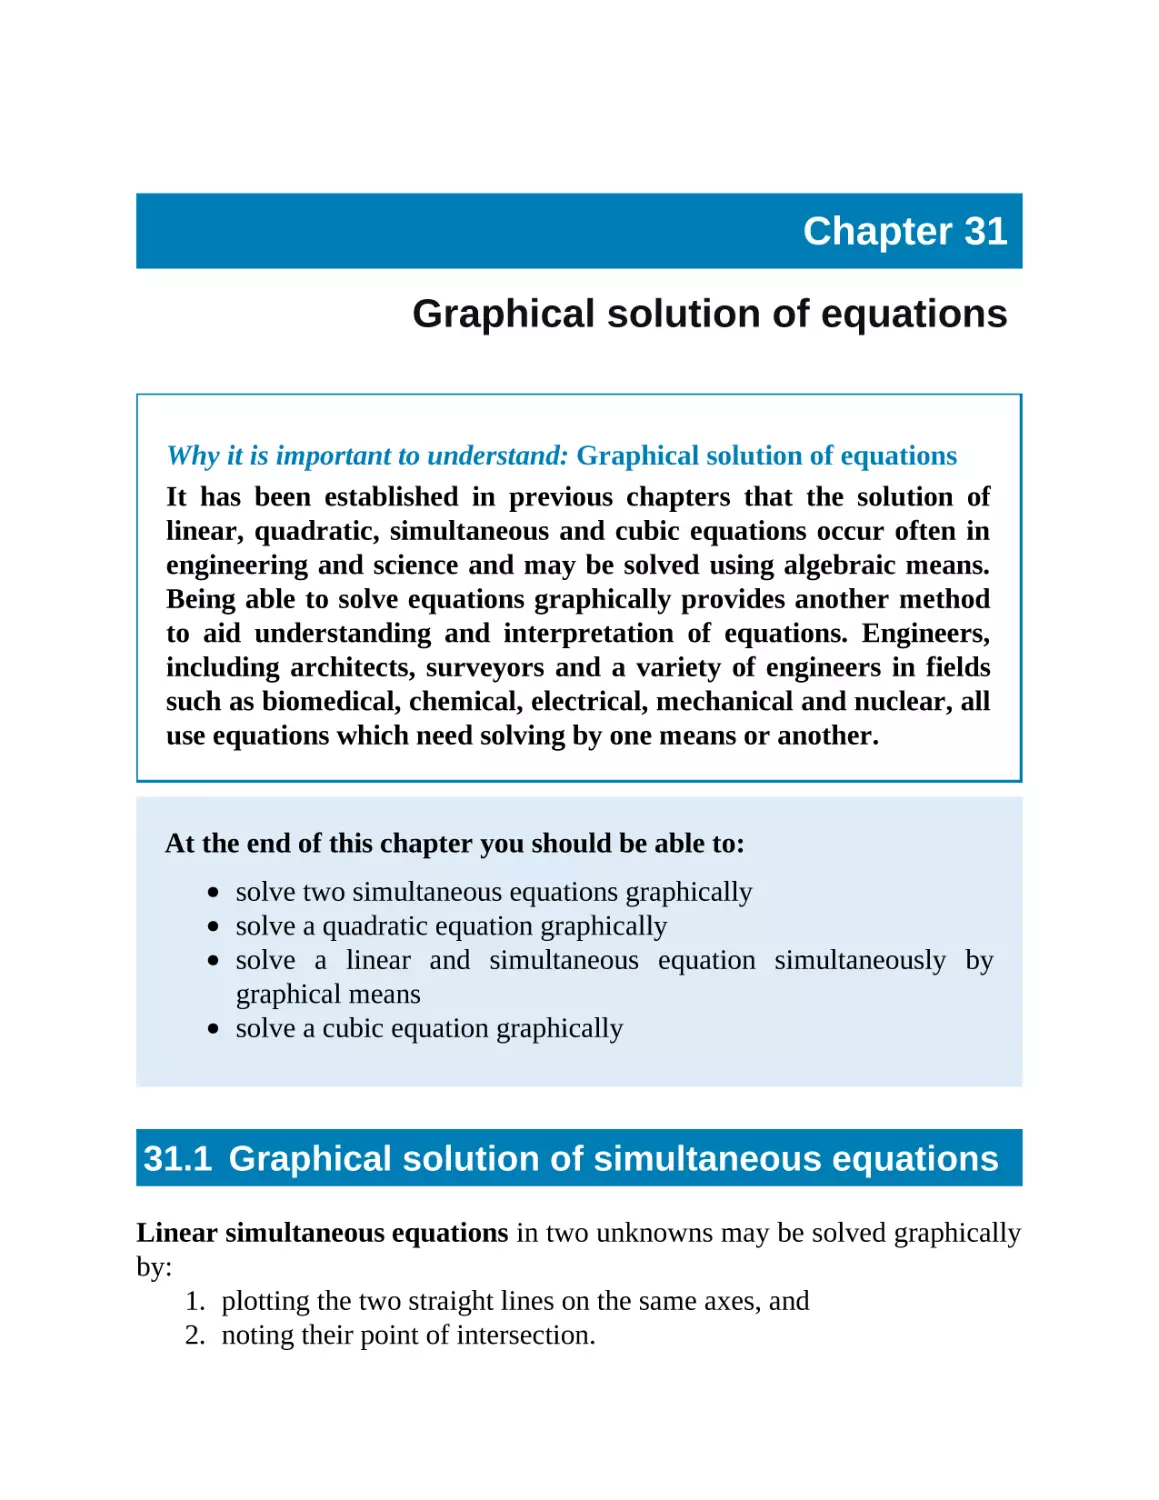 31 Graphical solution of equations
31.1 Graphical solution of simultaneous equations